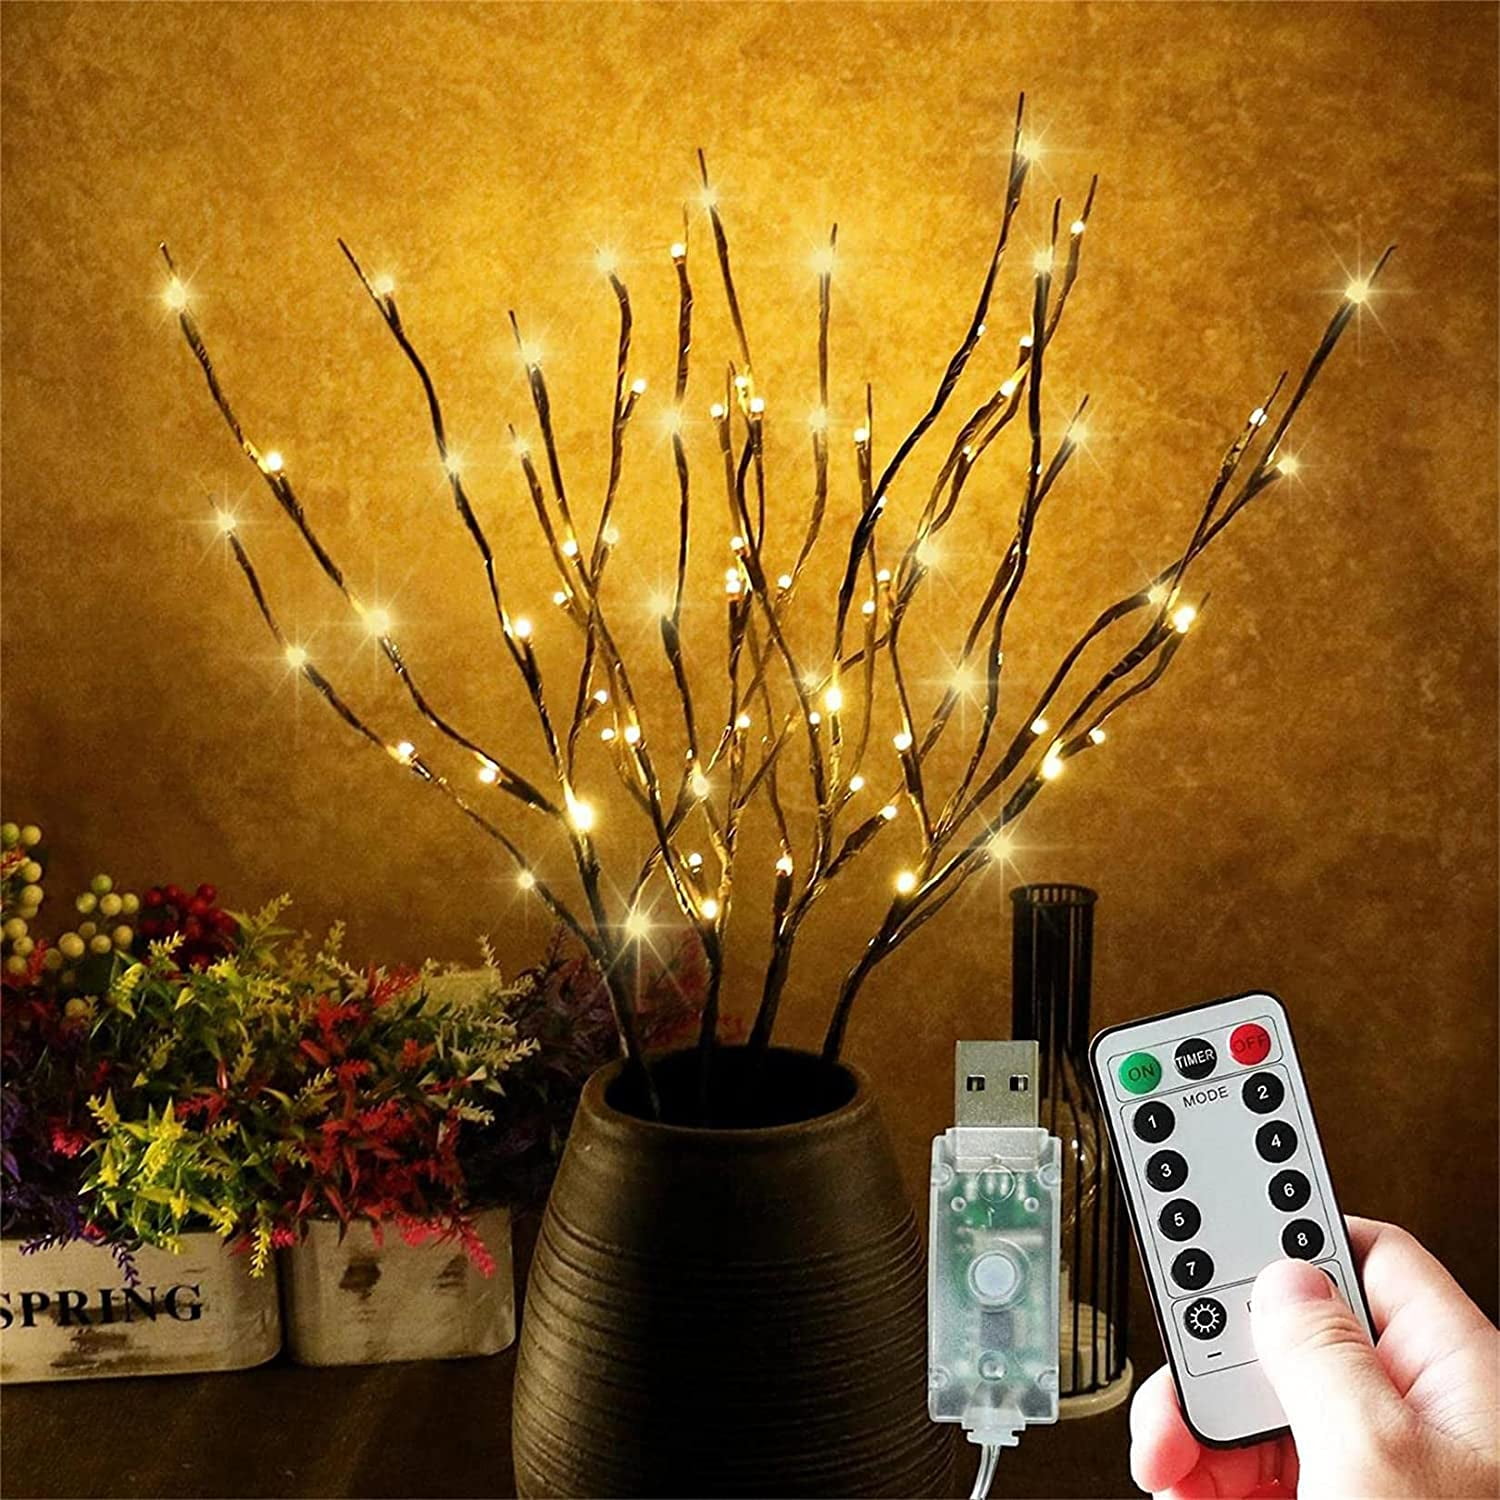 3 Pack Twig Lights - Romantic Decorative Branches - USB Plug-in